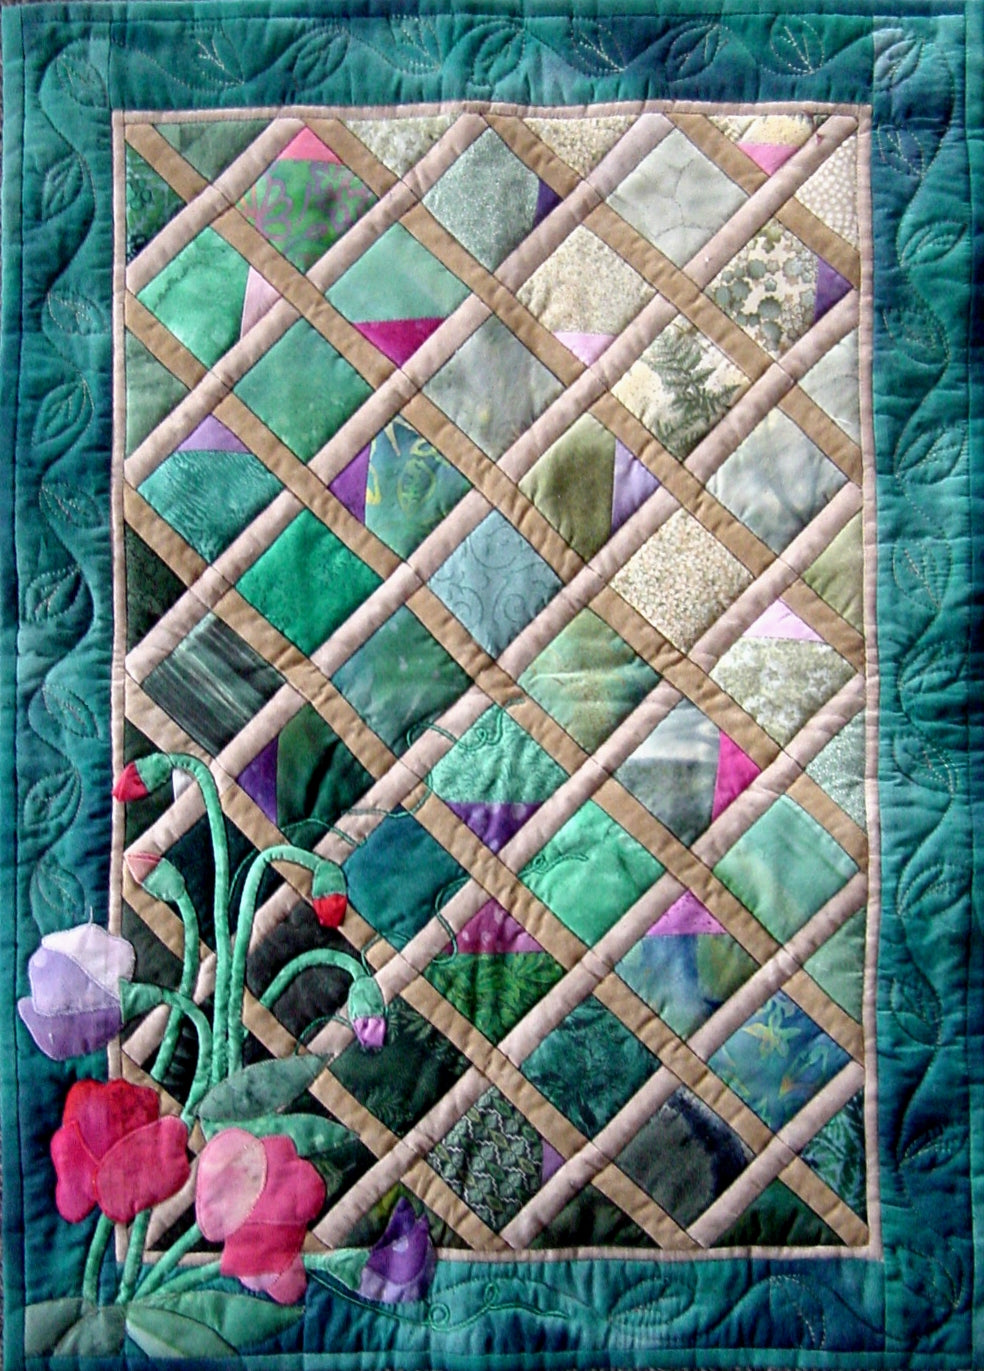 A small quilt wall hanging with sweet pea flowers and buds in the corner of a trellis